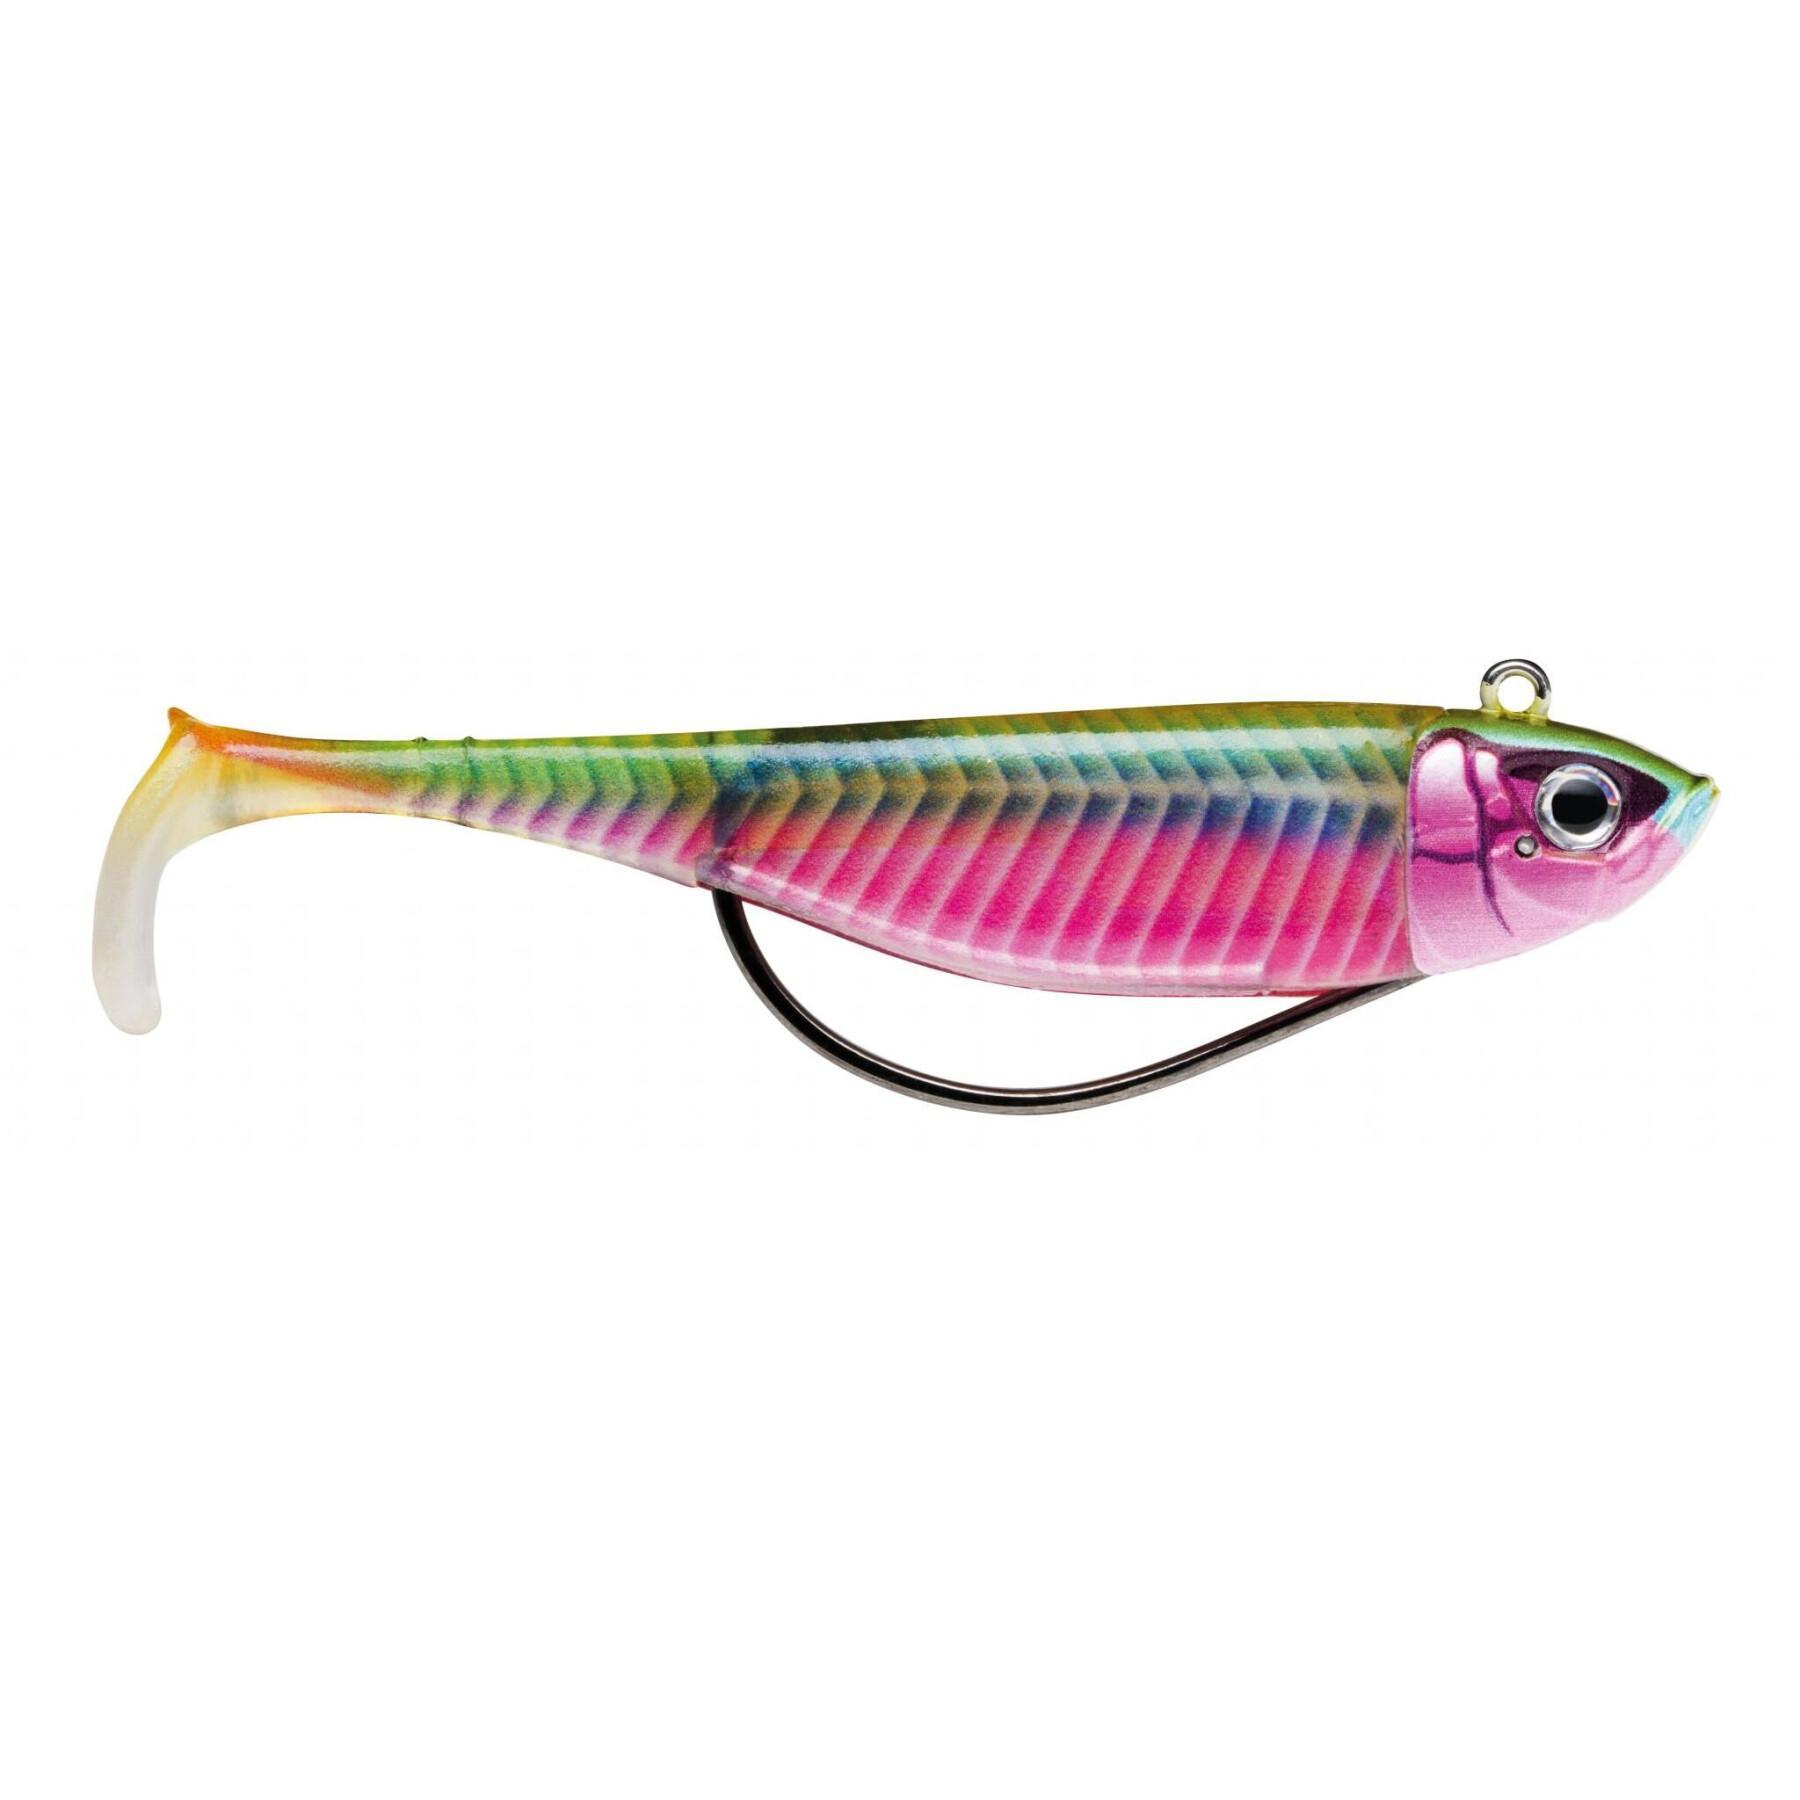 Engodos Storm Biscay Shad – 60g (x2)